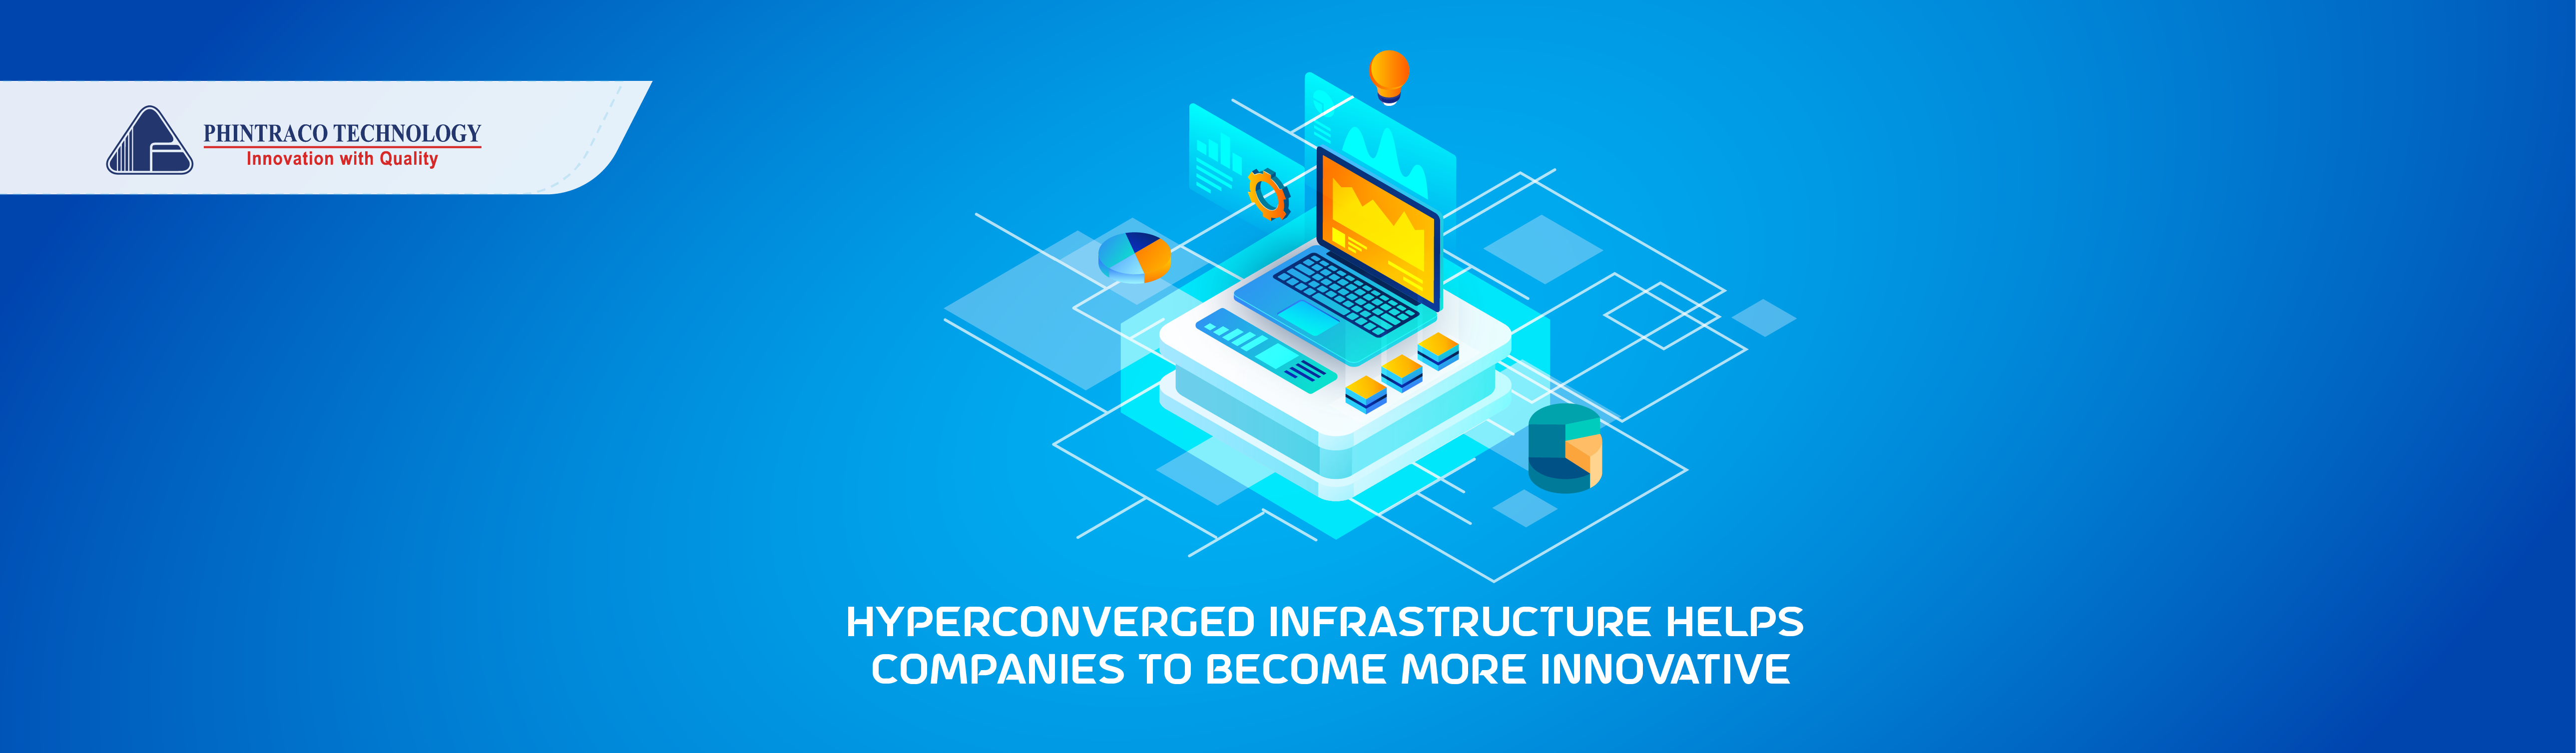 Make Your Company More Innovative Using Hyper-converged Infrastructure